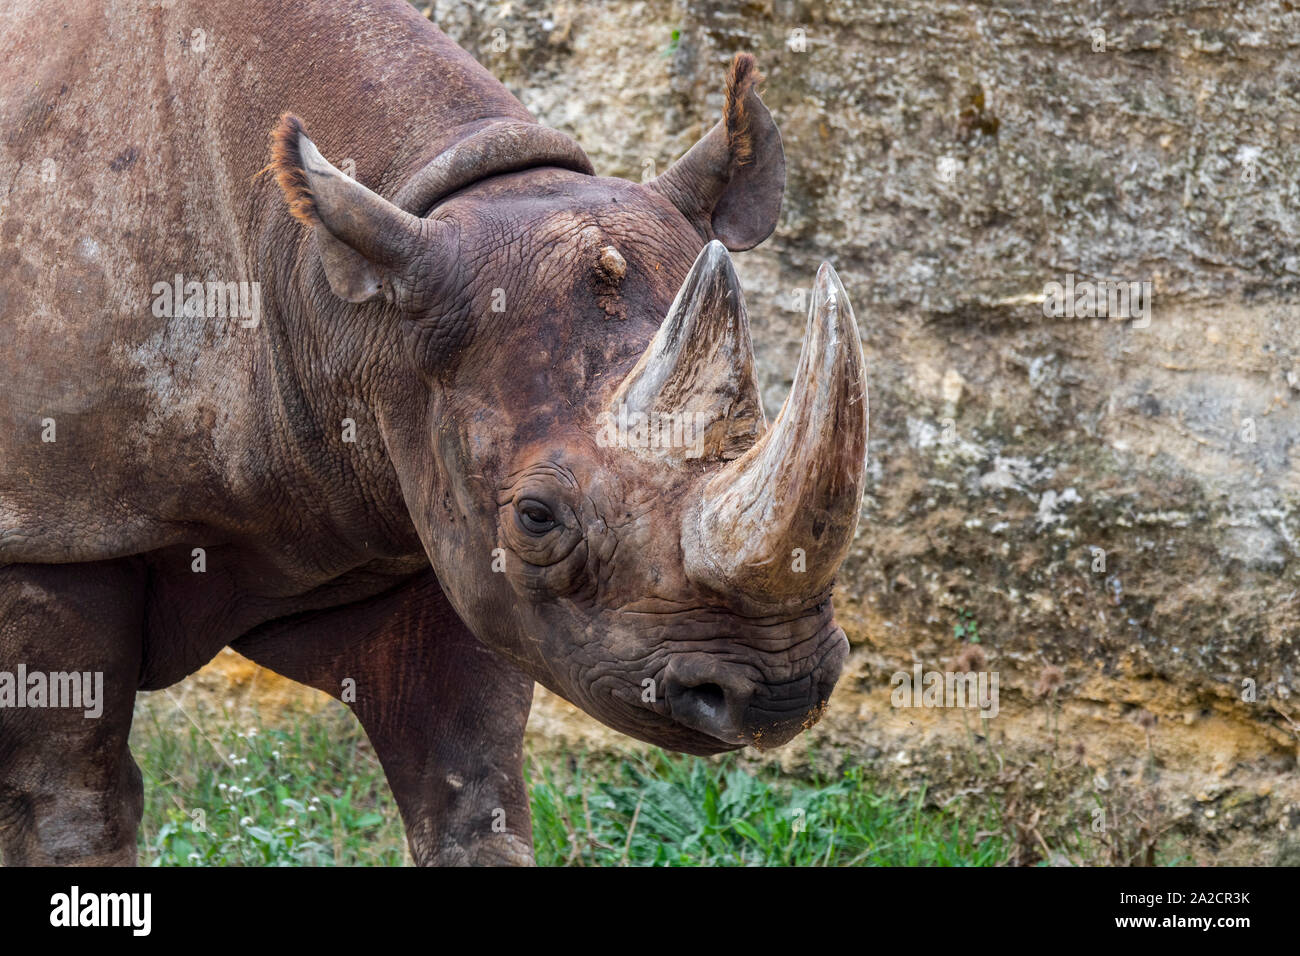 Black rhinoceros / black rhino / hook-lipped rhinoceros (Diceros bicornis) close-up of head and horn, native to eastern and southern Africa Stock Photo